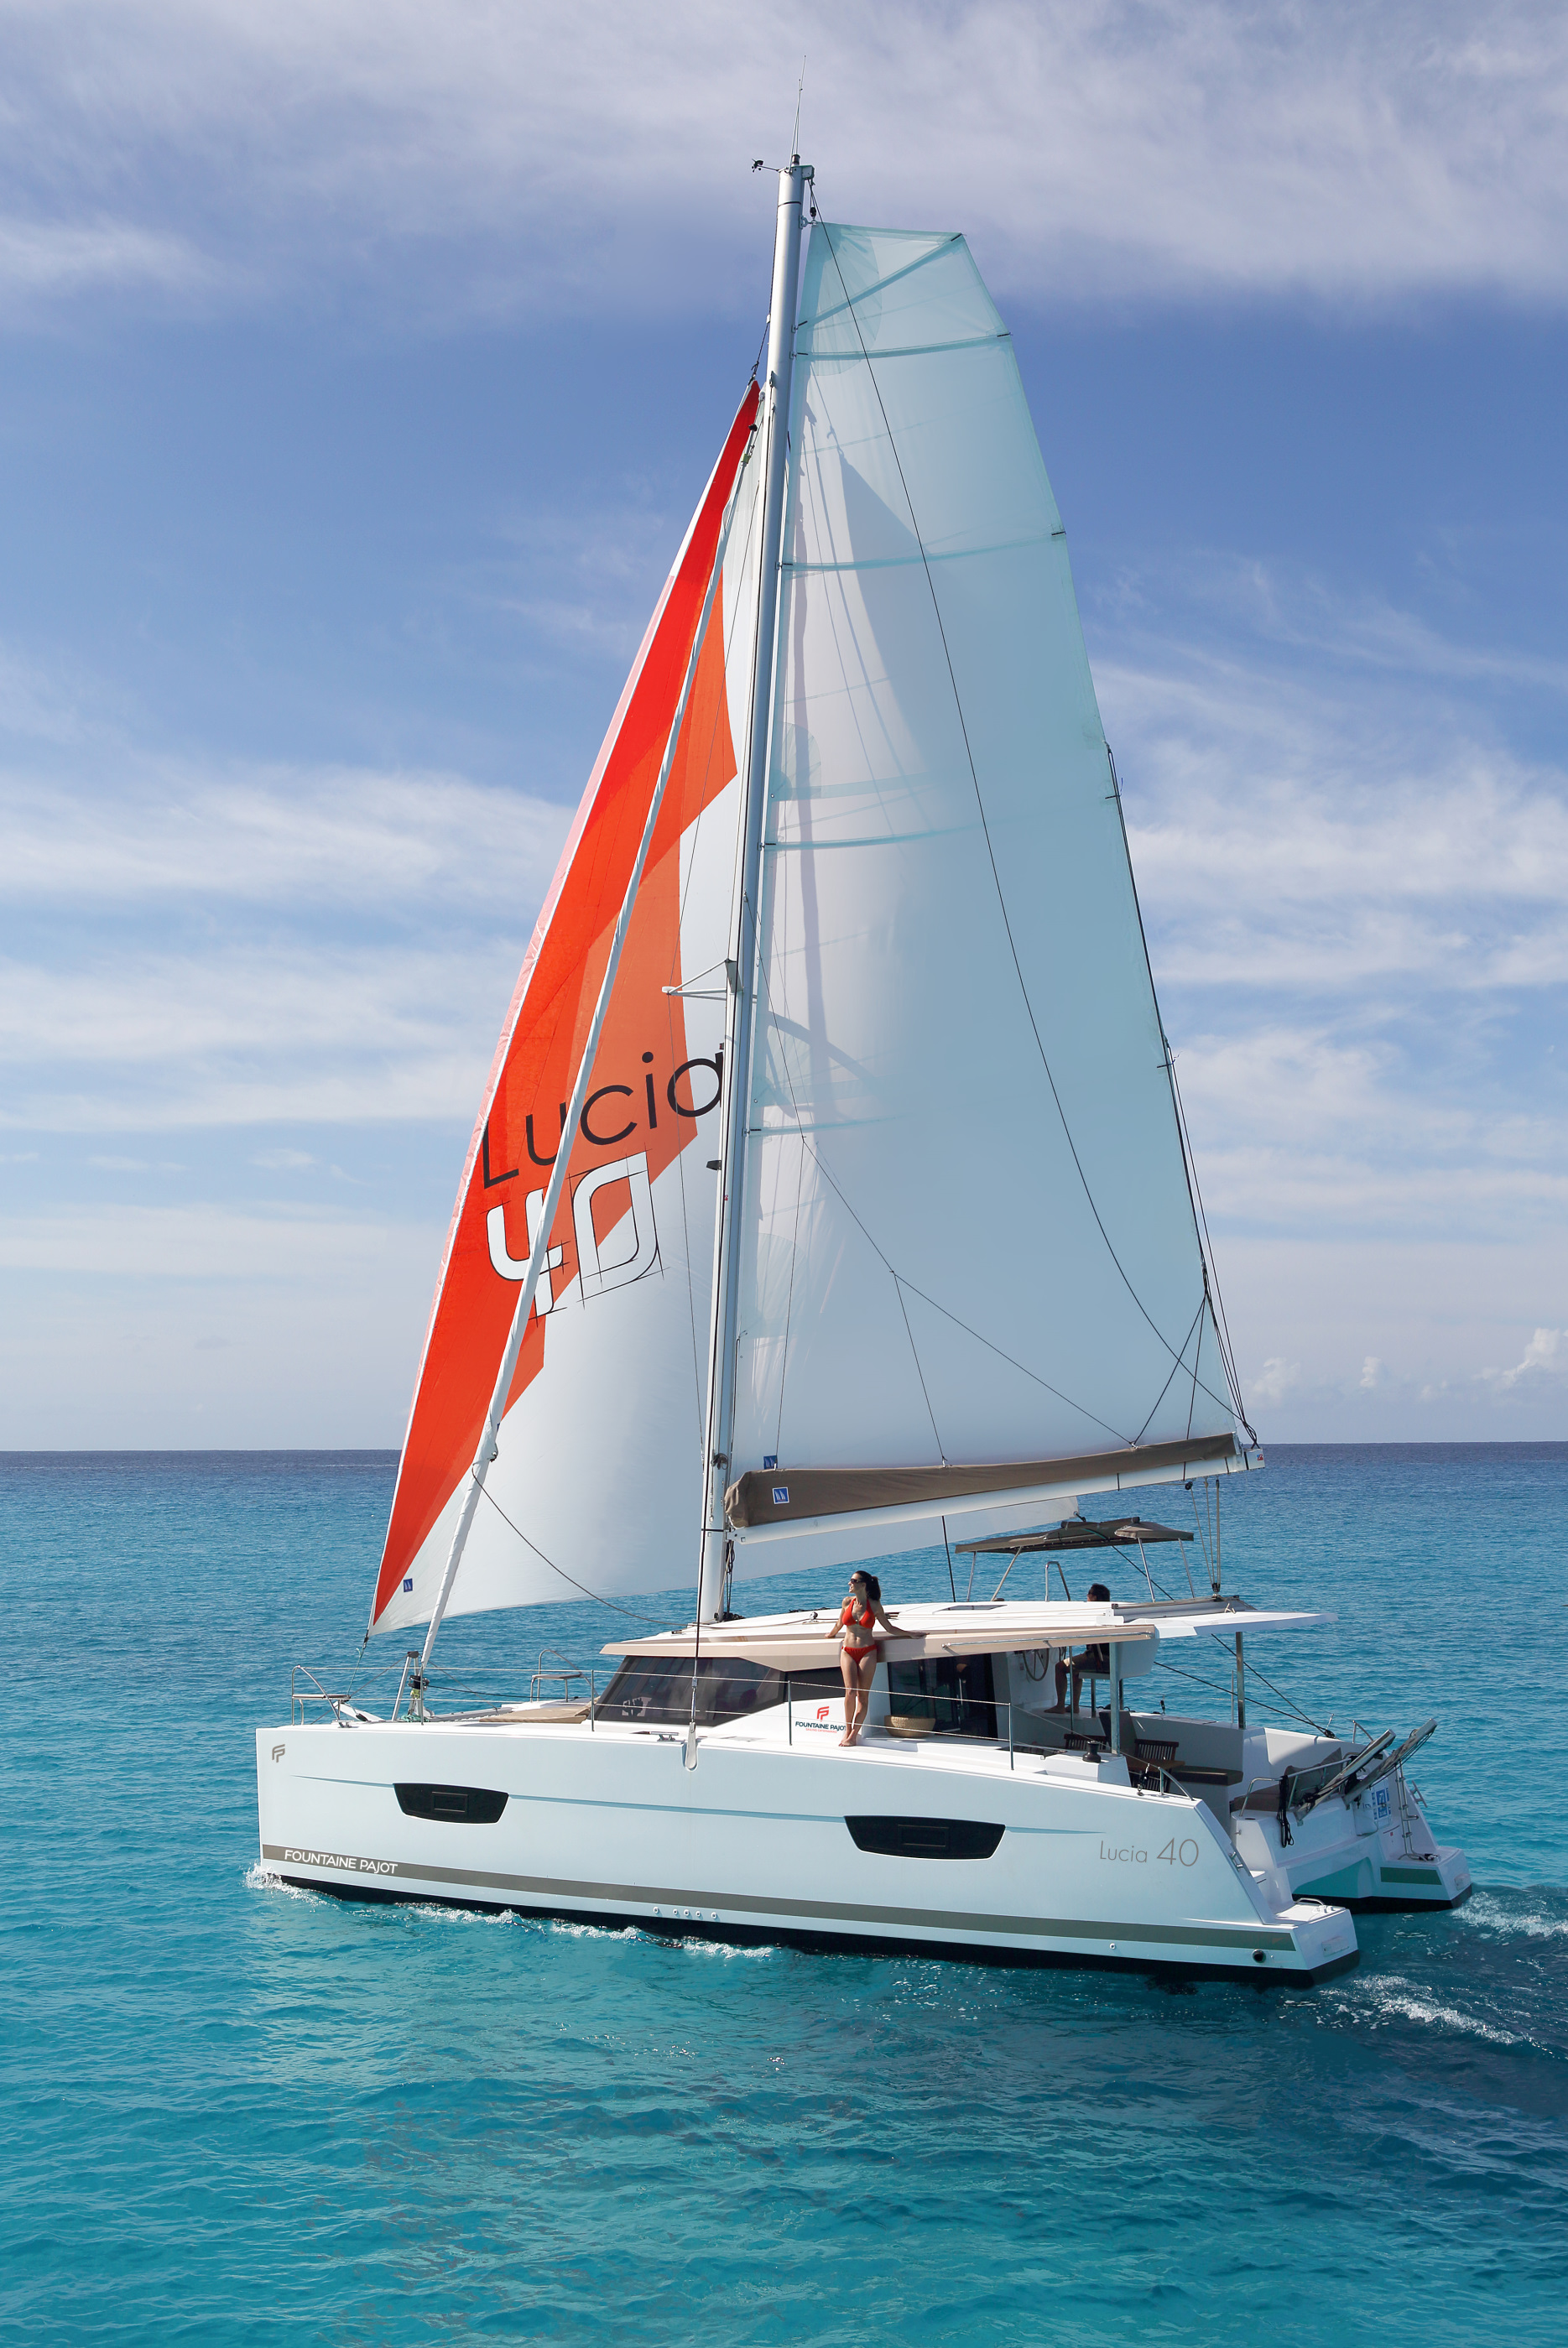 New Sail  for Sale 2020 LUCIA 40 